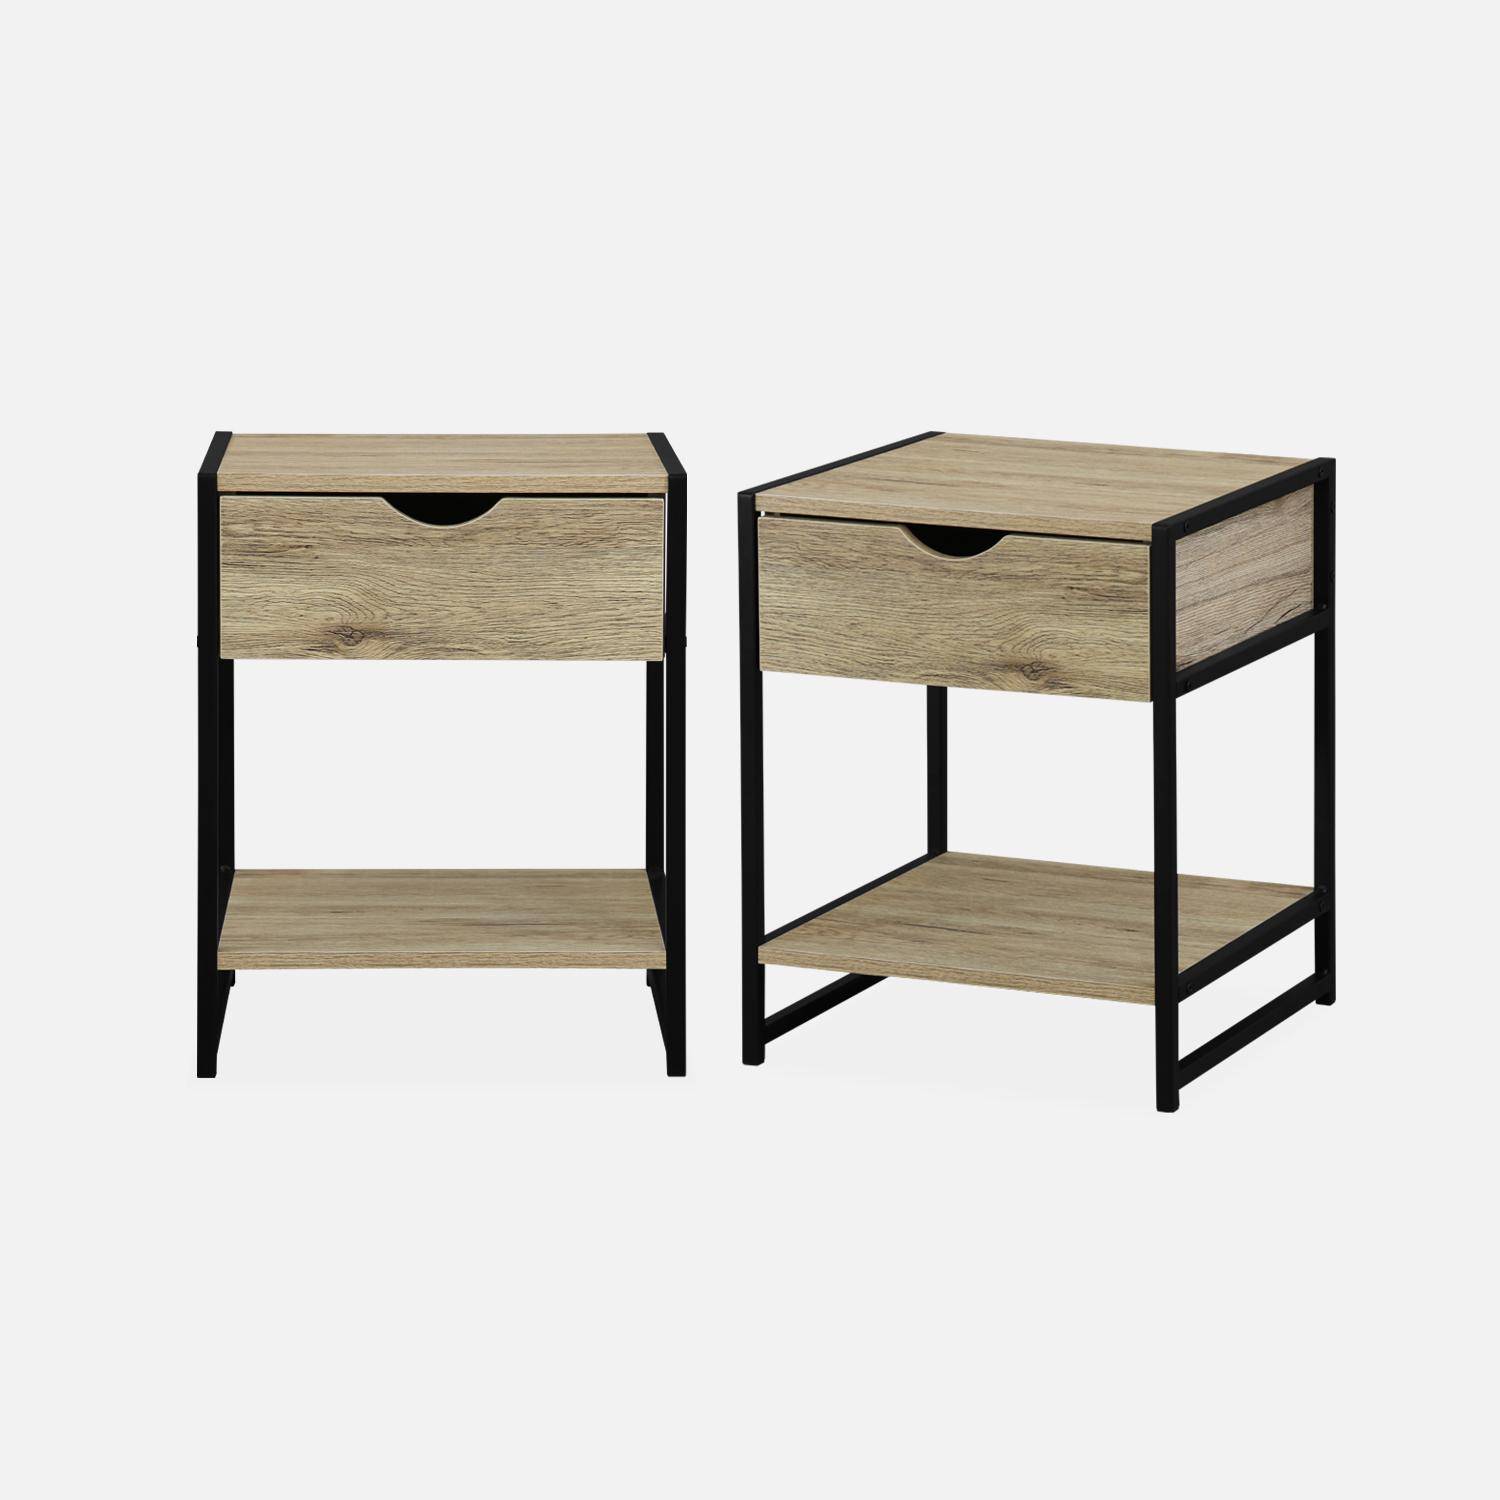 Pair of metal and wood-effect bedside tables with drawer and shelf, 40x40x50cm - Loft Photo4